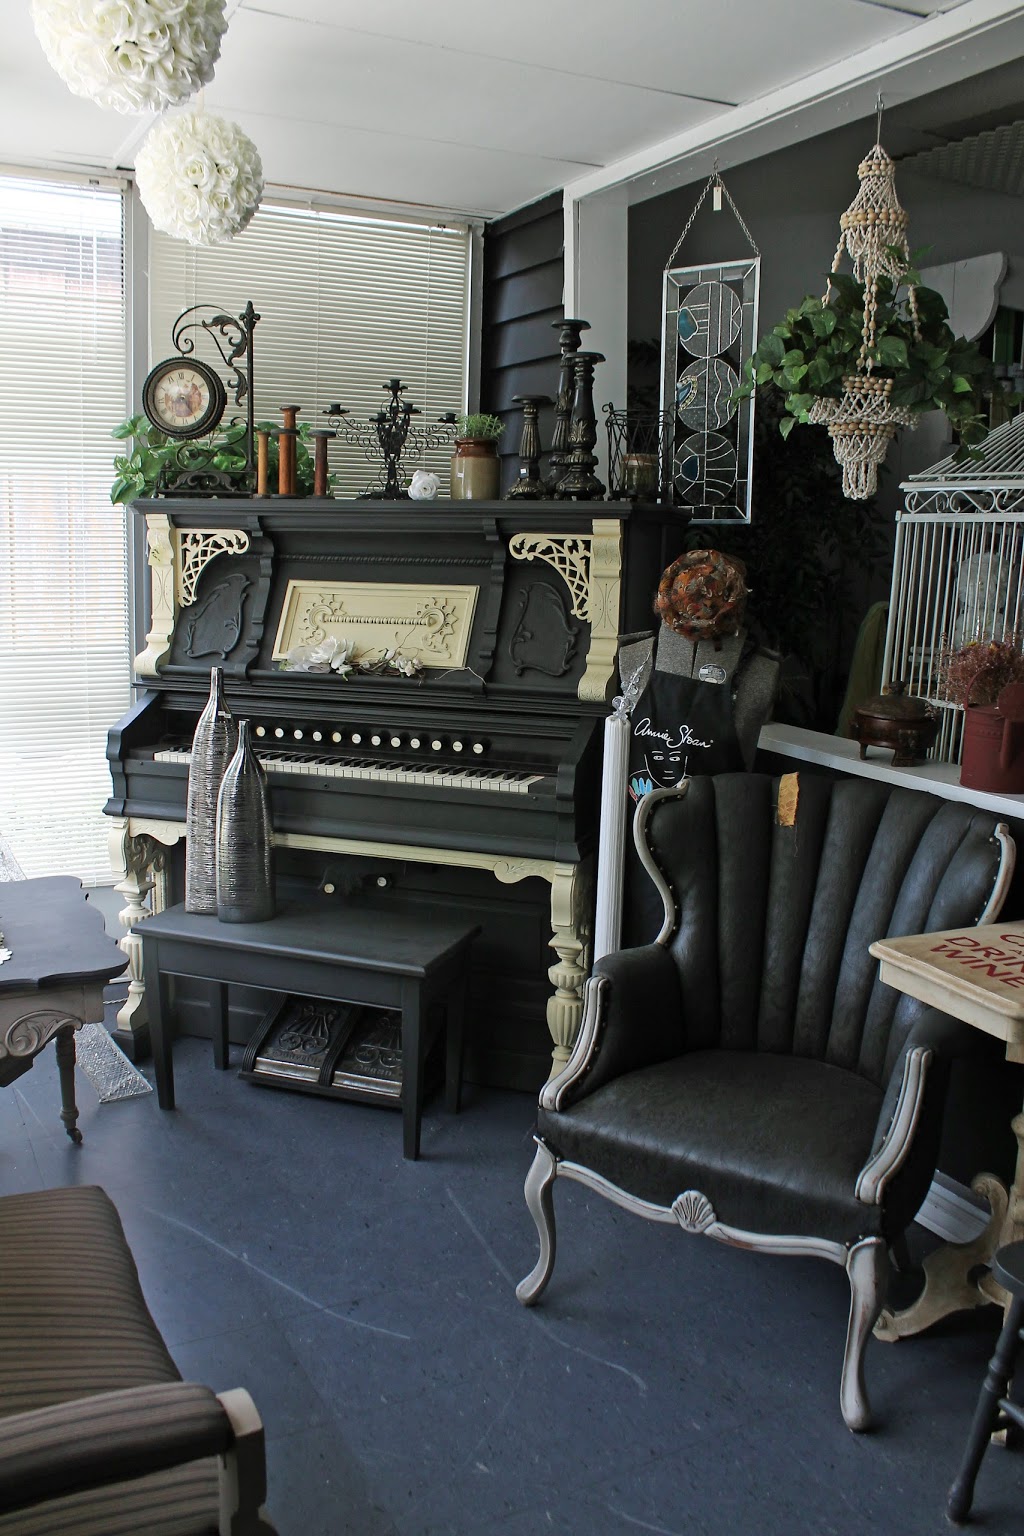 Painted Treasures | home goods store | 302 Davis St, Sarnia, ON N7T 1B7, Canada | 5194915200 OR +1 519-491-5200